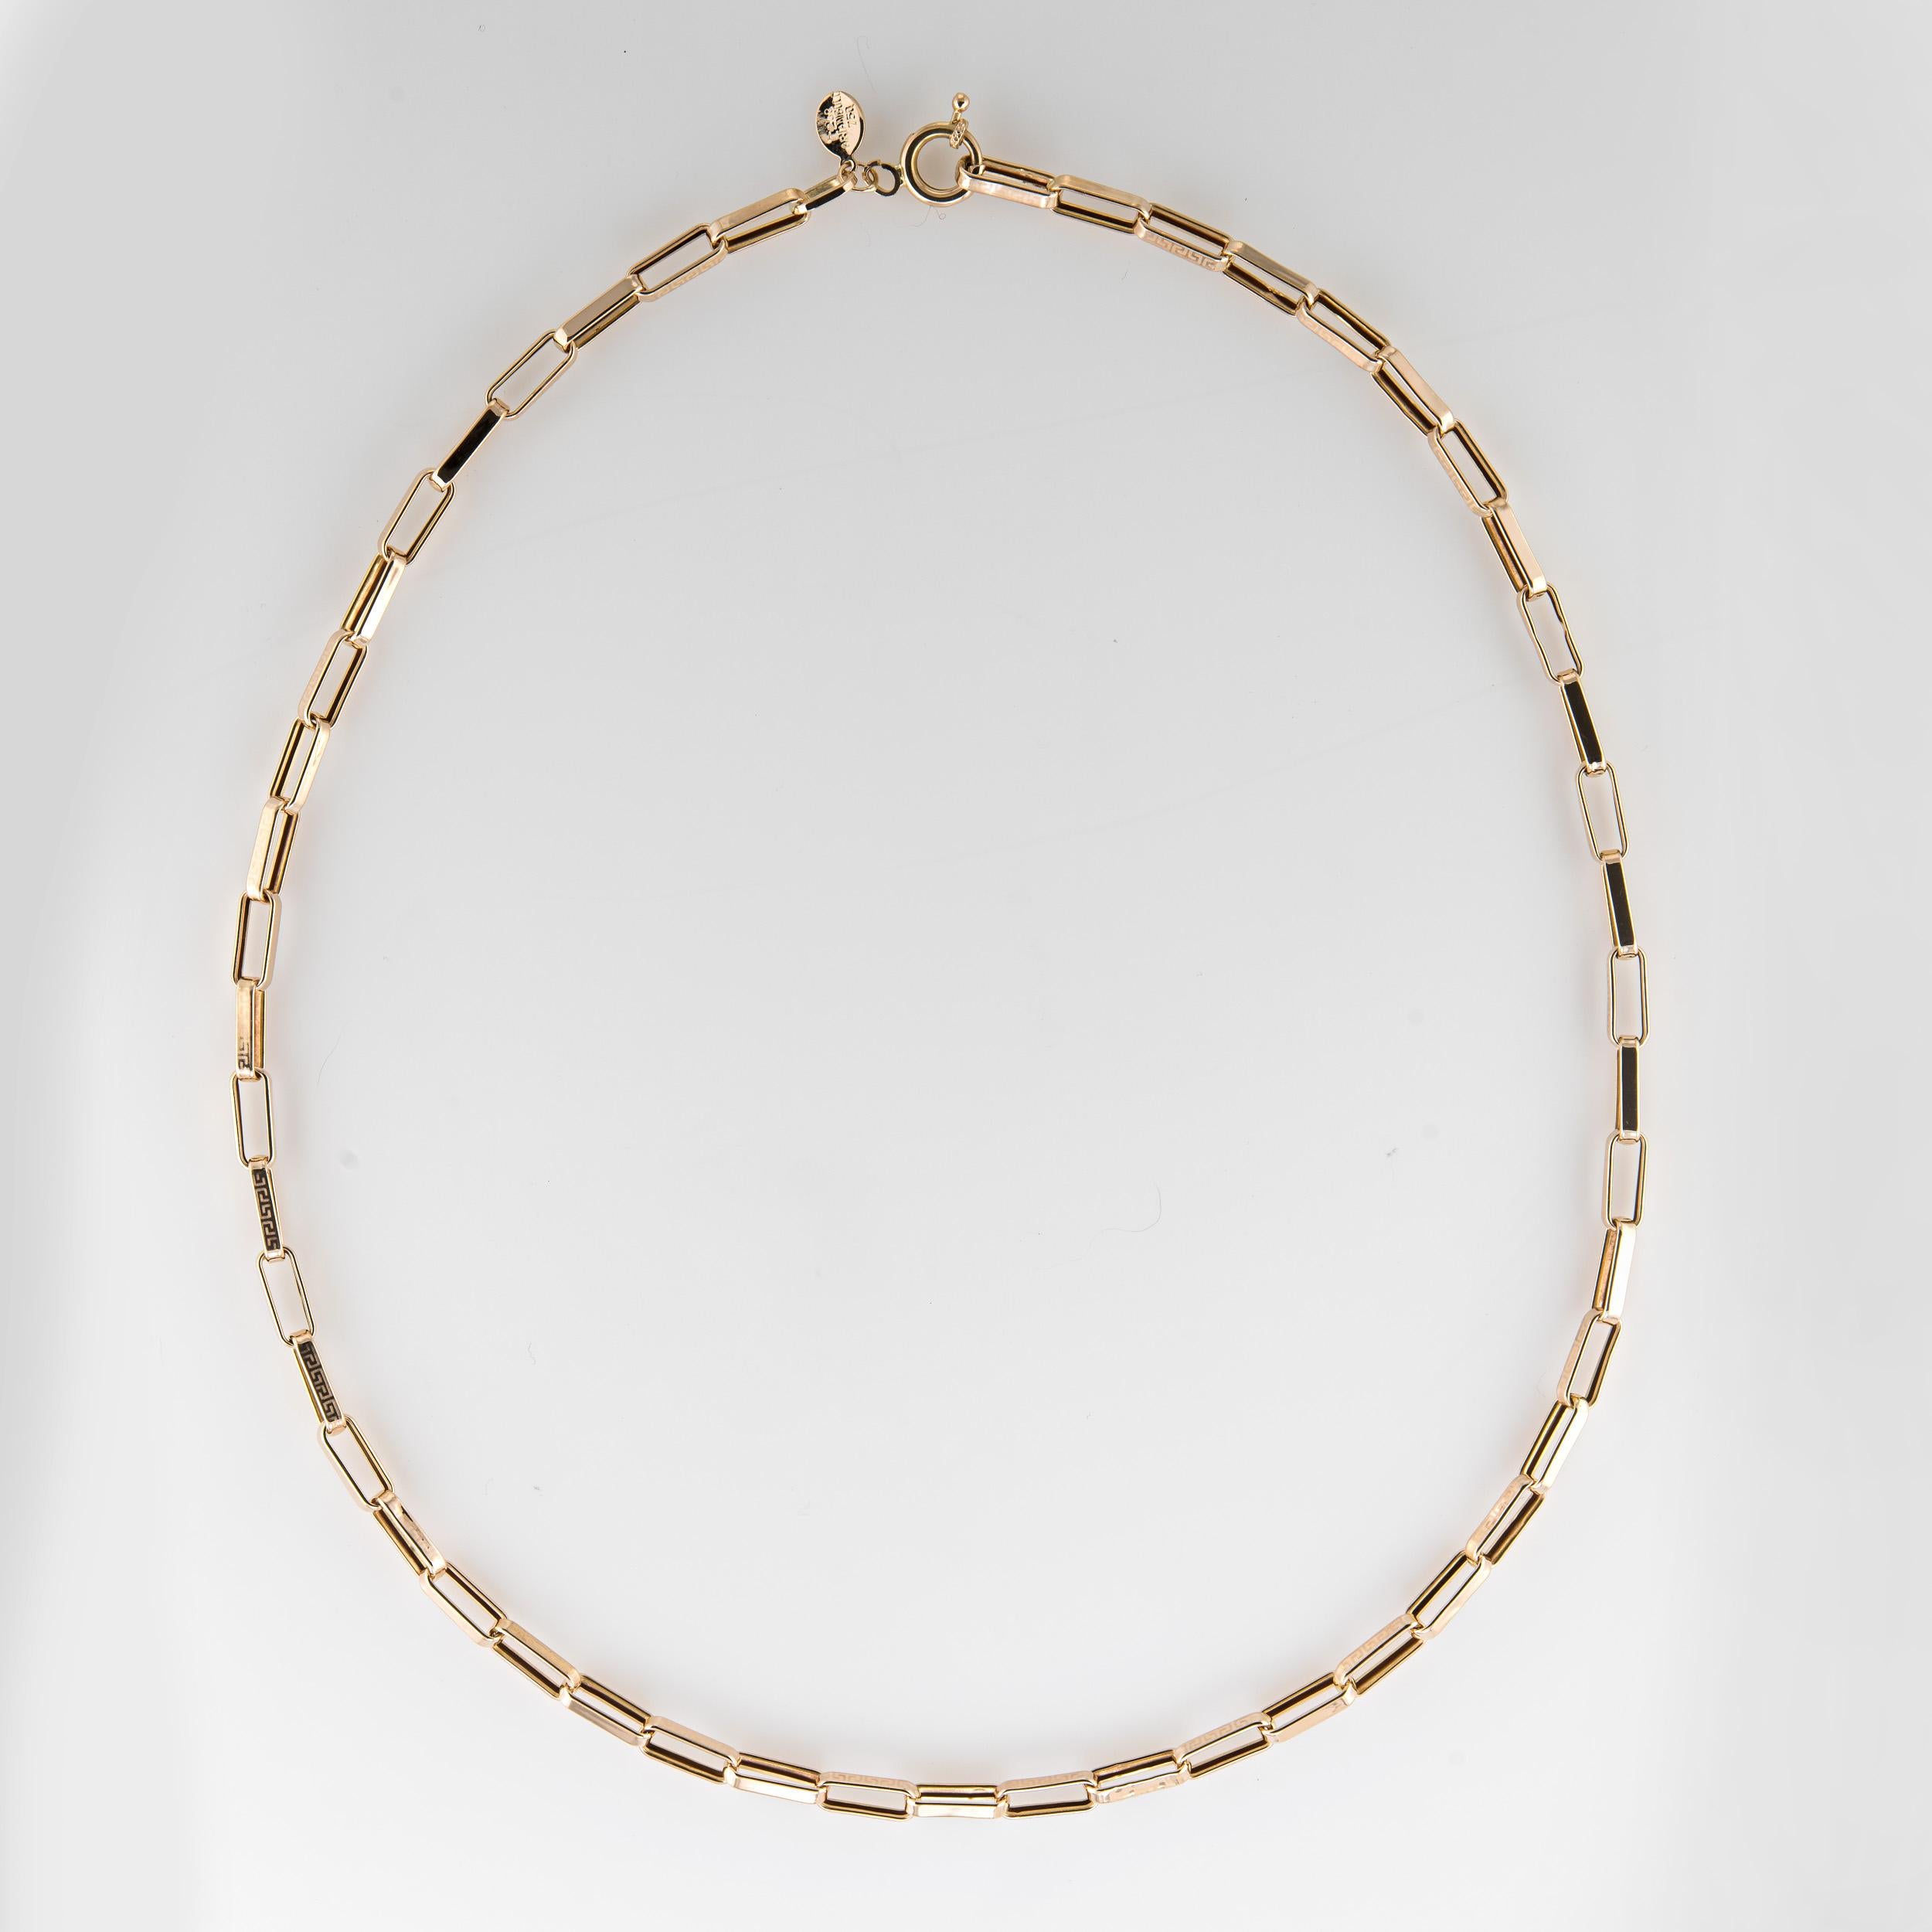 Stylish and finely detailed estate necklace crafted in 18 karat yellow gold.  

The necklace features rectangular links with an alternating etched Greek key pattern to every other link. The 20 inch necklace is great worn alone or layered with your